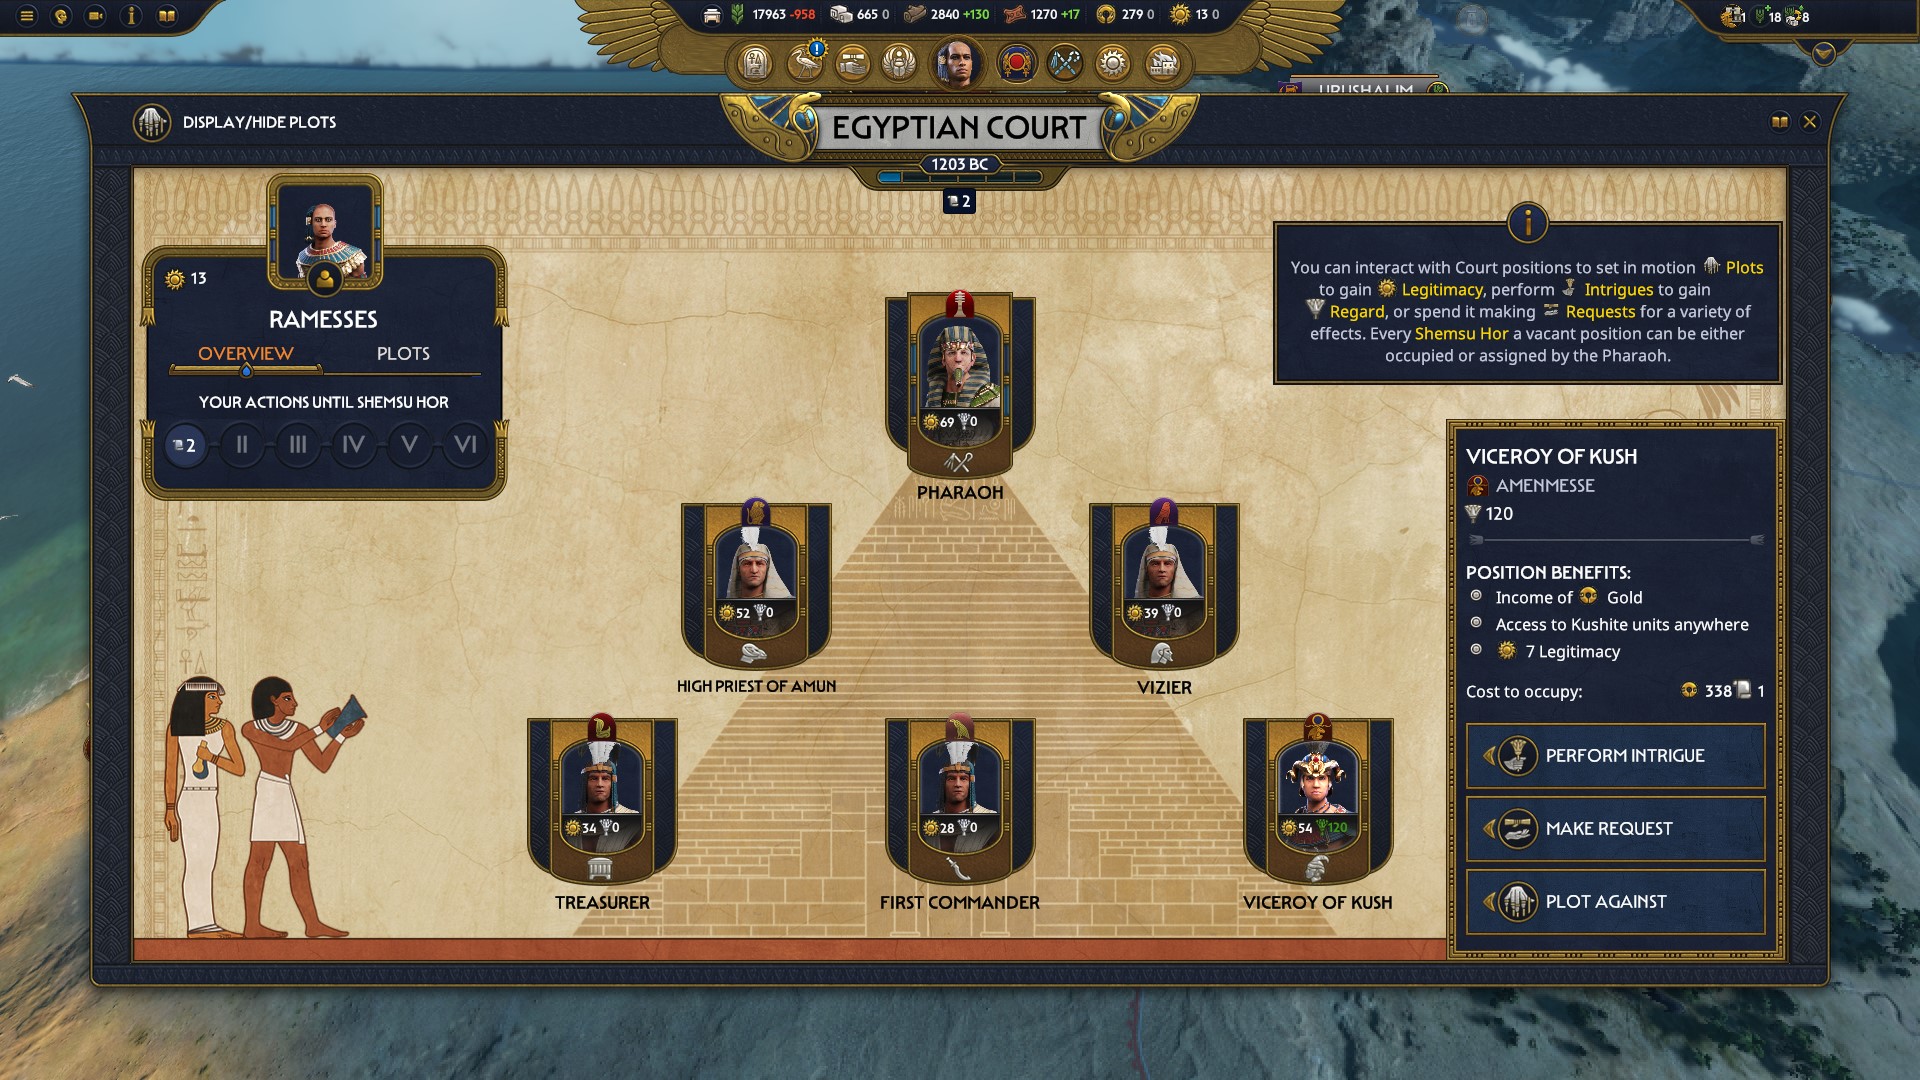 The court intrigue system, represented by a pyramid-themed menu